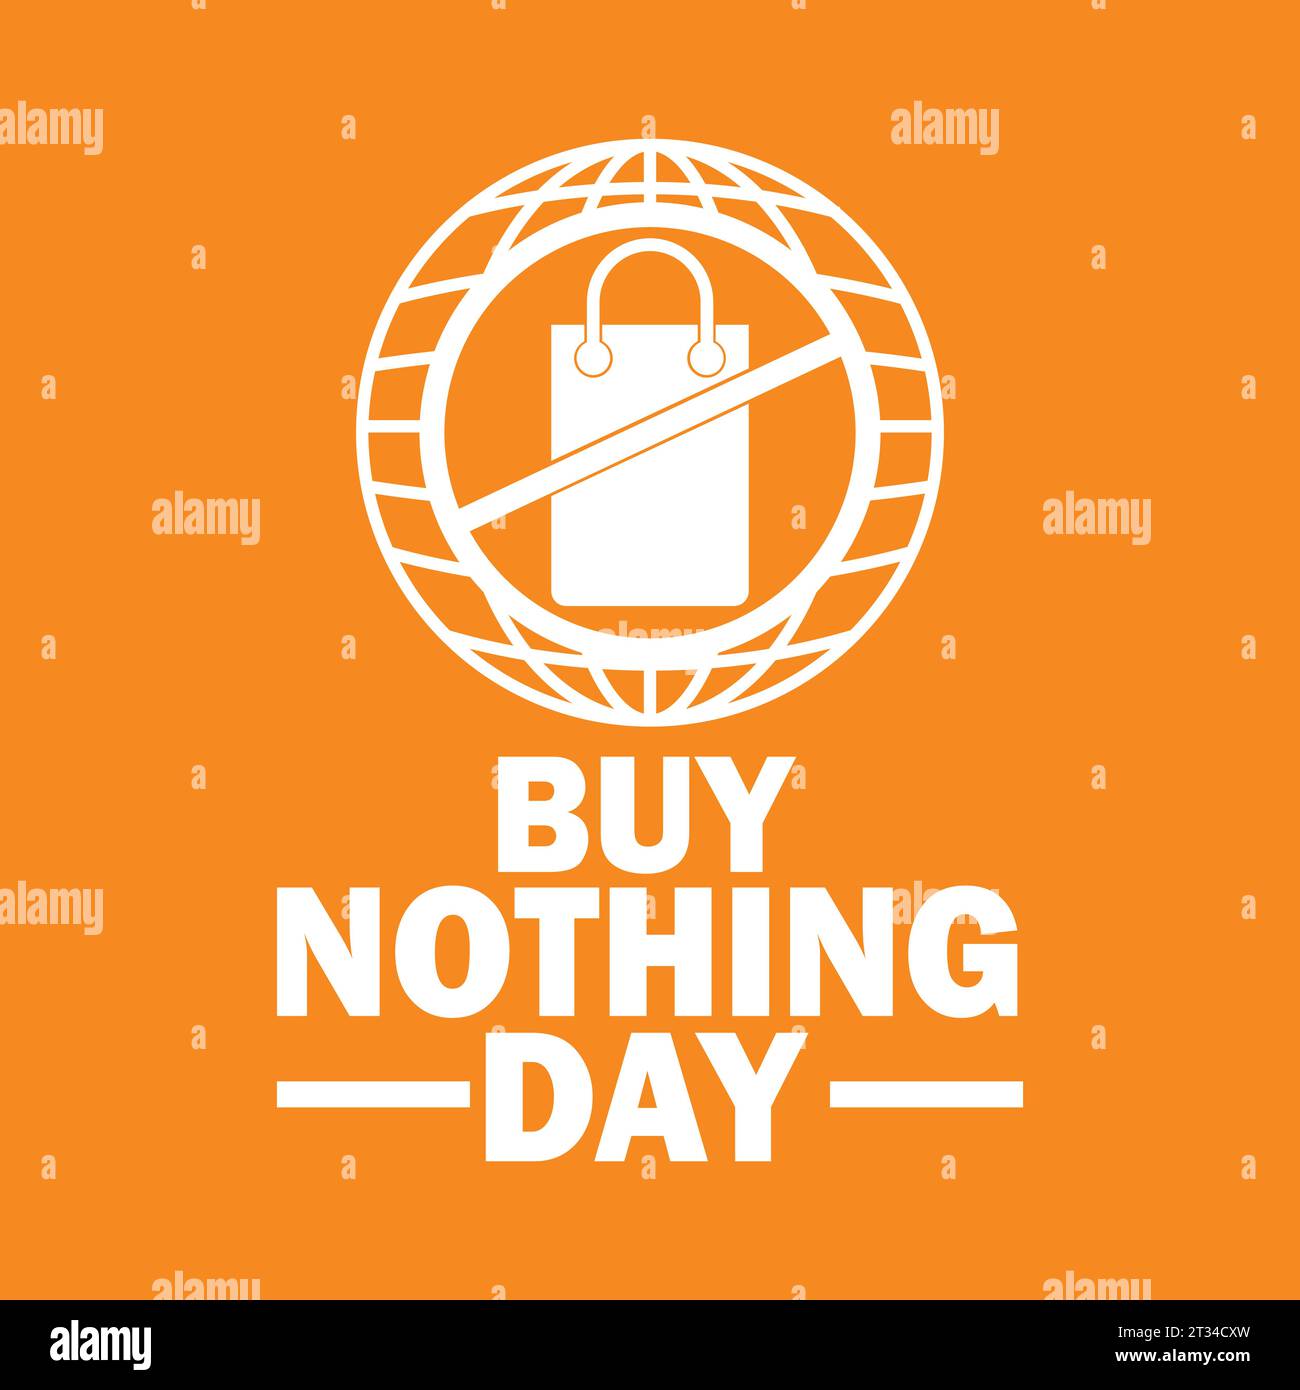 Buy Nothing Day. Holiday concept. Template for background, banner, card, poster with text inscription. Vector illustration Stock Vector